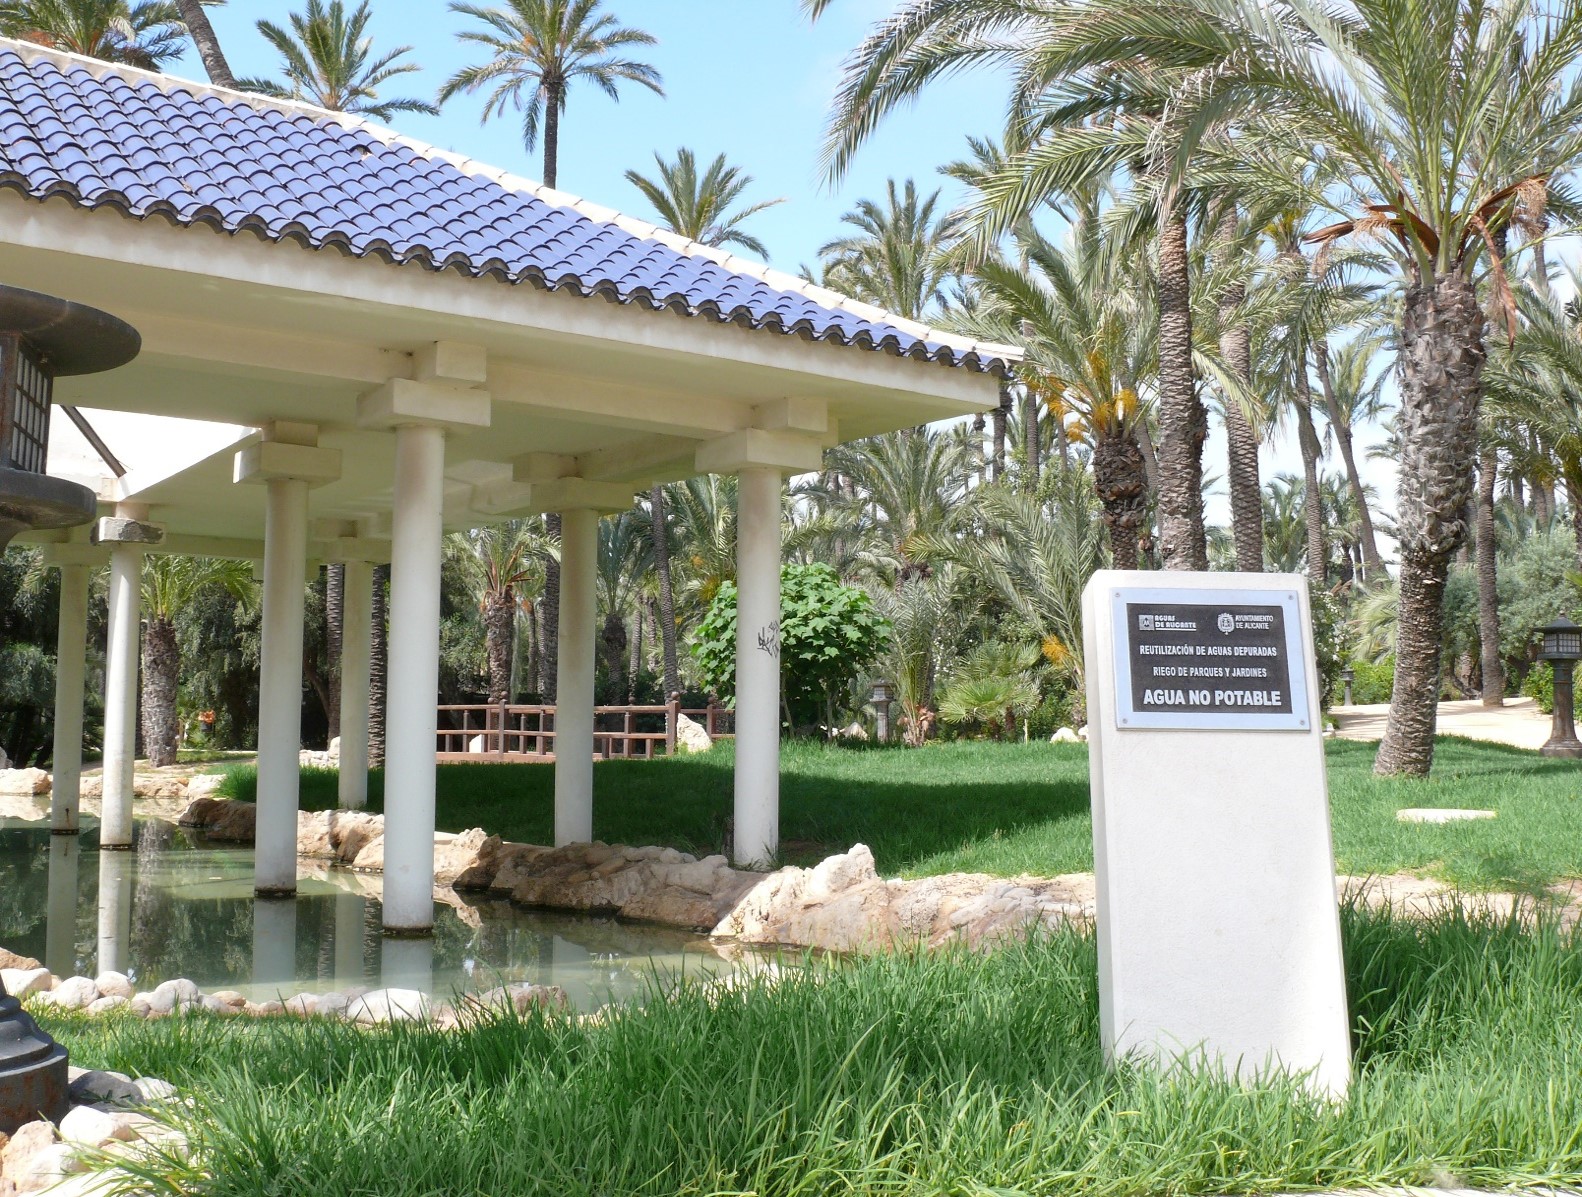 Signal of reclaimed water for irrigation at Alicante's gardens.